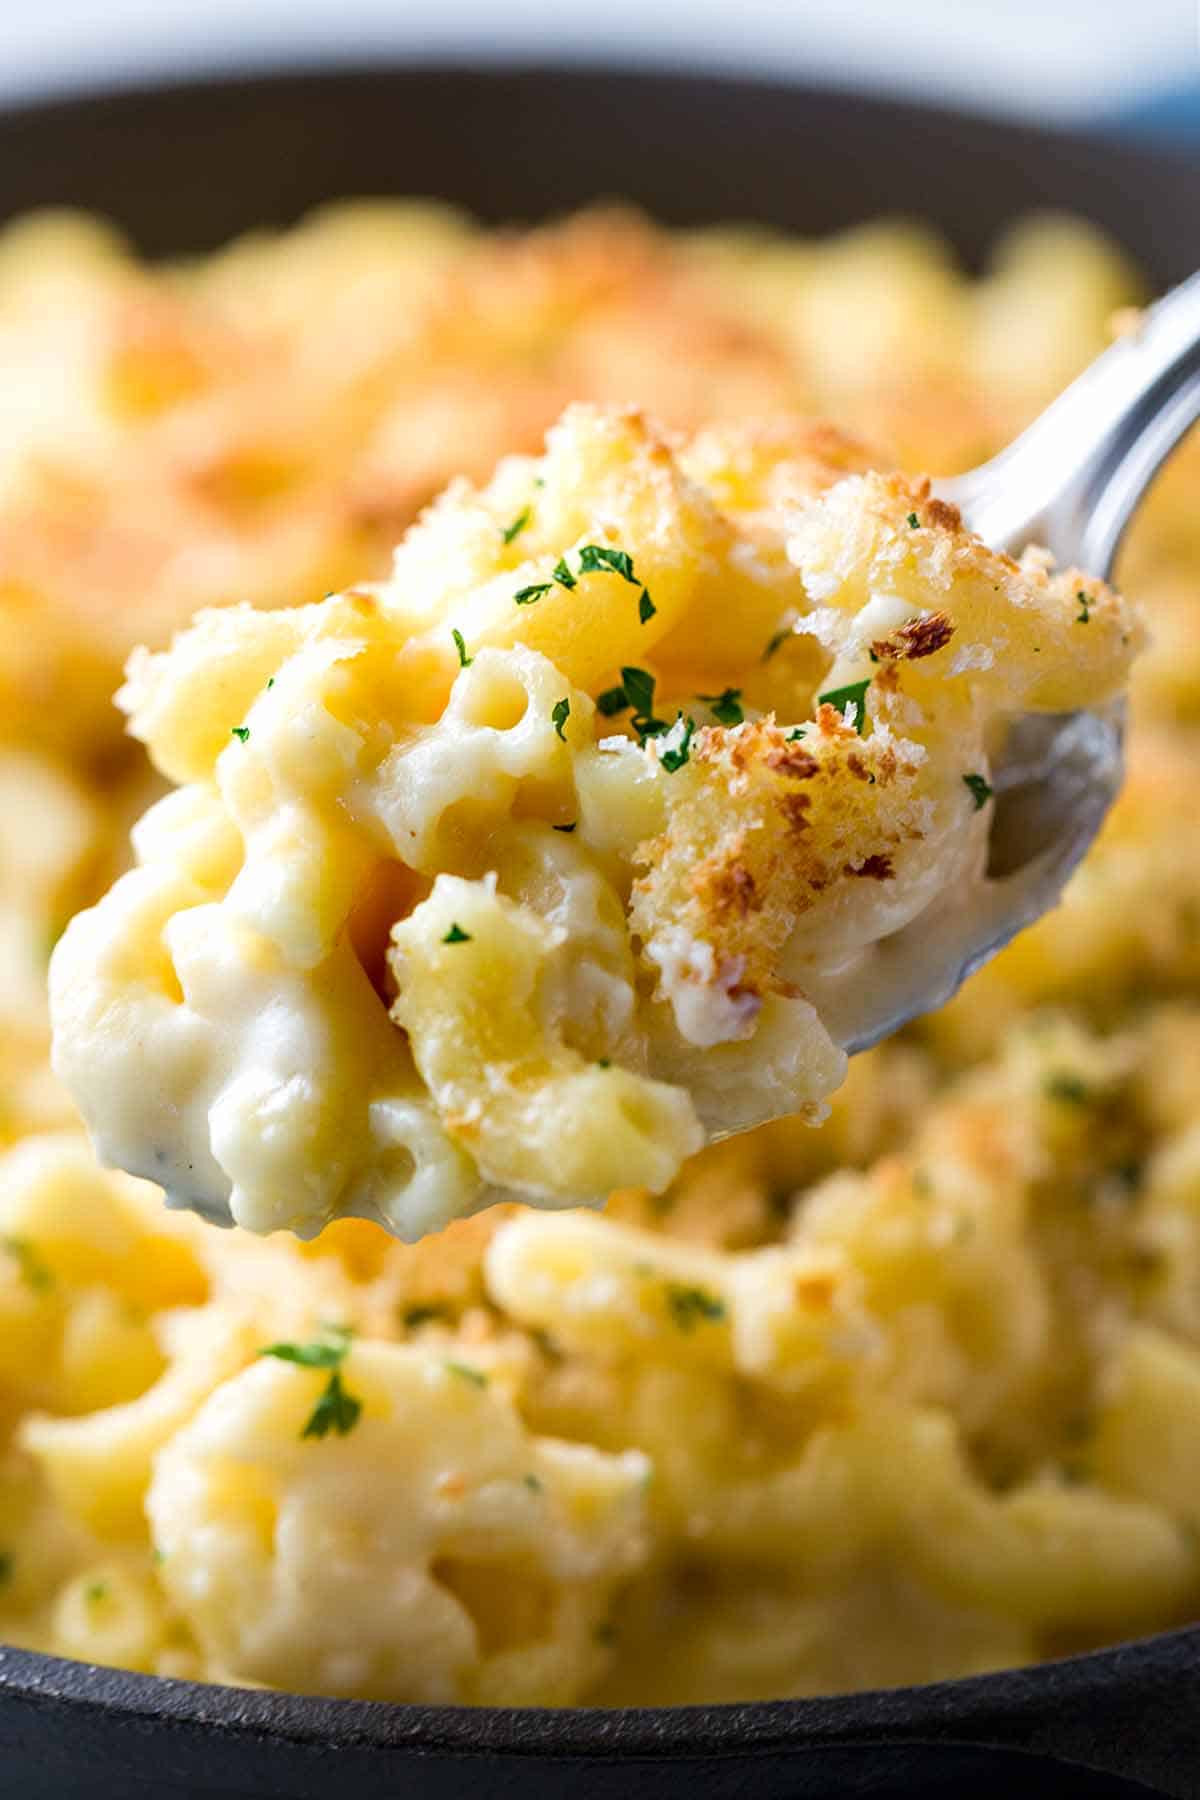 Recipes For Baked Mac And Cheese With Bread Crumbs
 Baked Macaroni and Cheese with Bread Crumb Topping